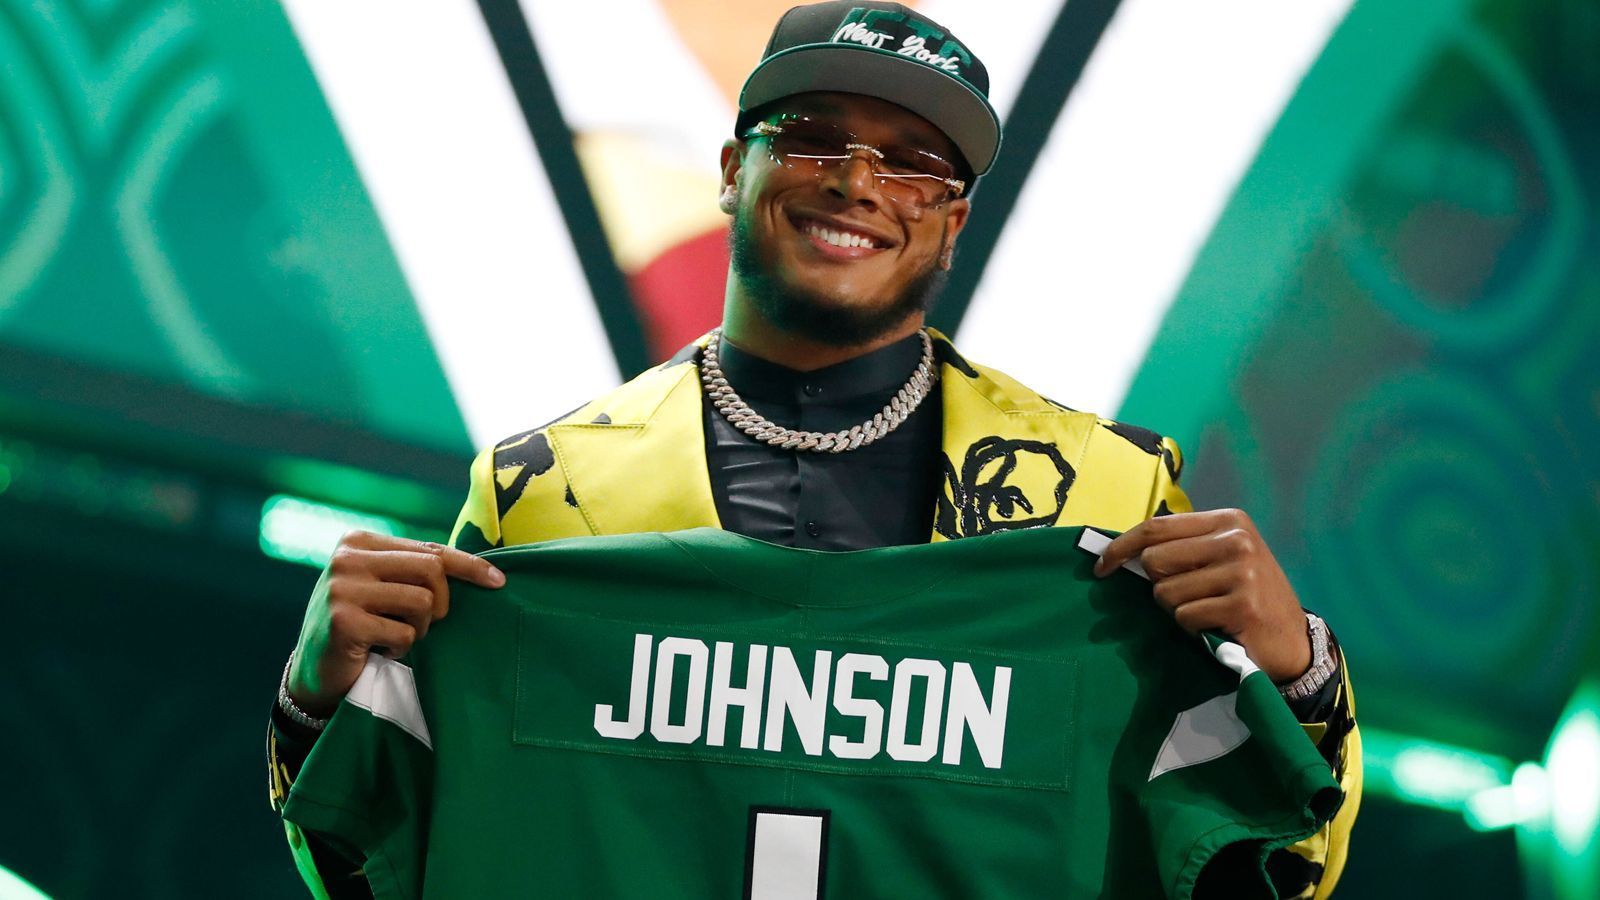 
                <strong>26. Pick: Jermaine Johnson (Defensive End, New York Jets)</strong><br>
                &#x2022; <strong>Vertrag unterschrieben: Ja</strong><br>&#x2022; <strong>Signing Bonus</strong>: 6.698.126 US-Dollar <br>&#x2022; <strong>Gesamtgehalt</strong>: 13.087.423 US-Dollar<br>
              